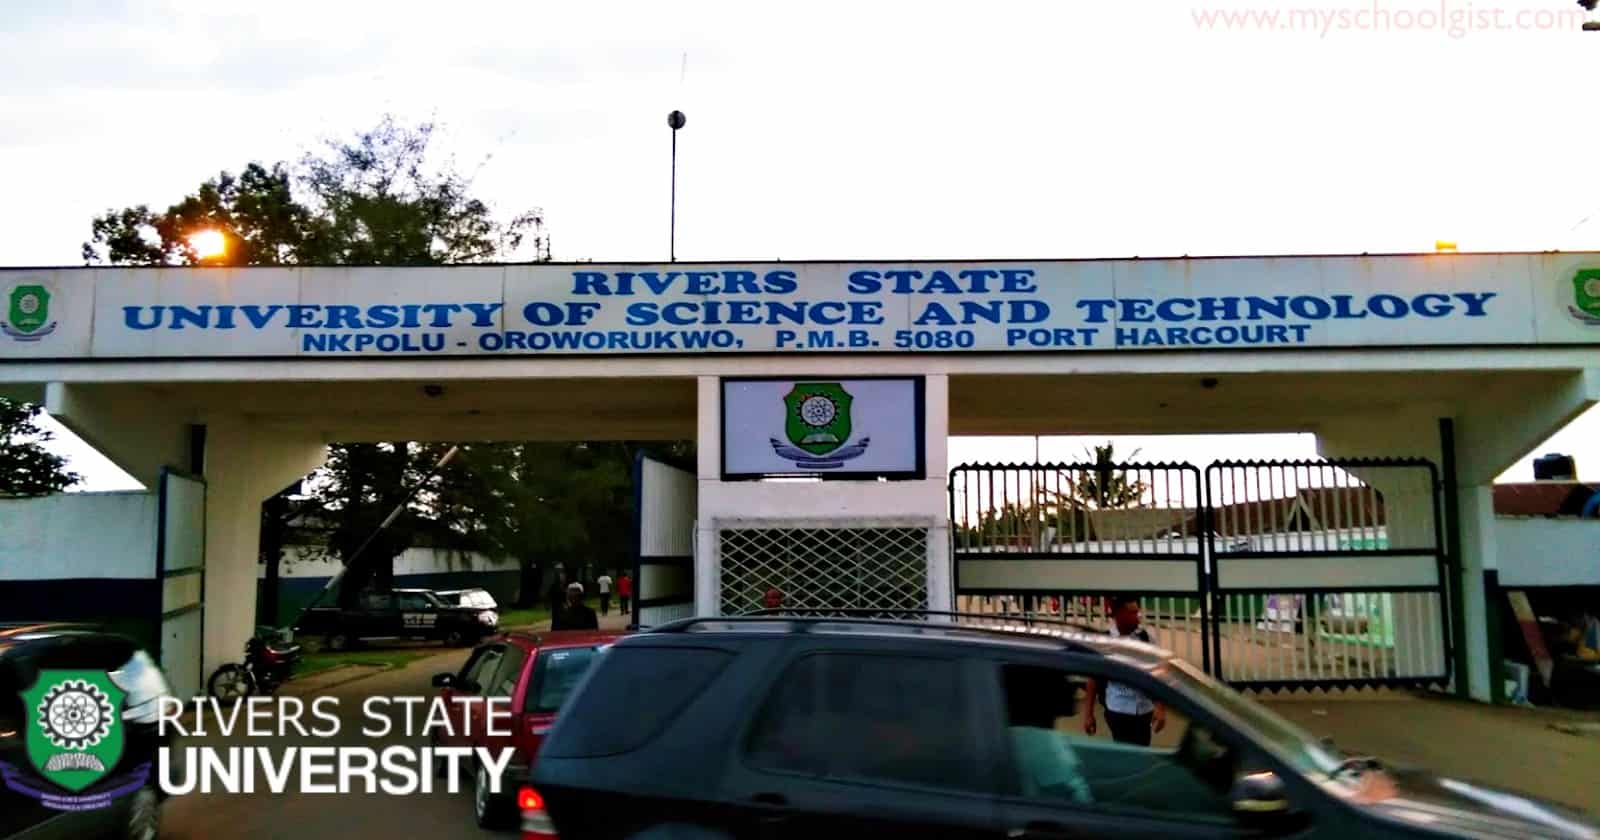 Rivers State University (RSU) Clearance Exercise